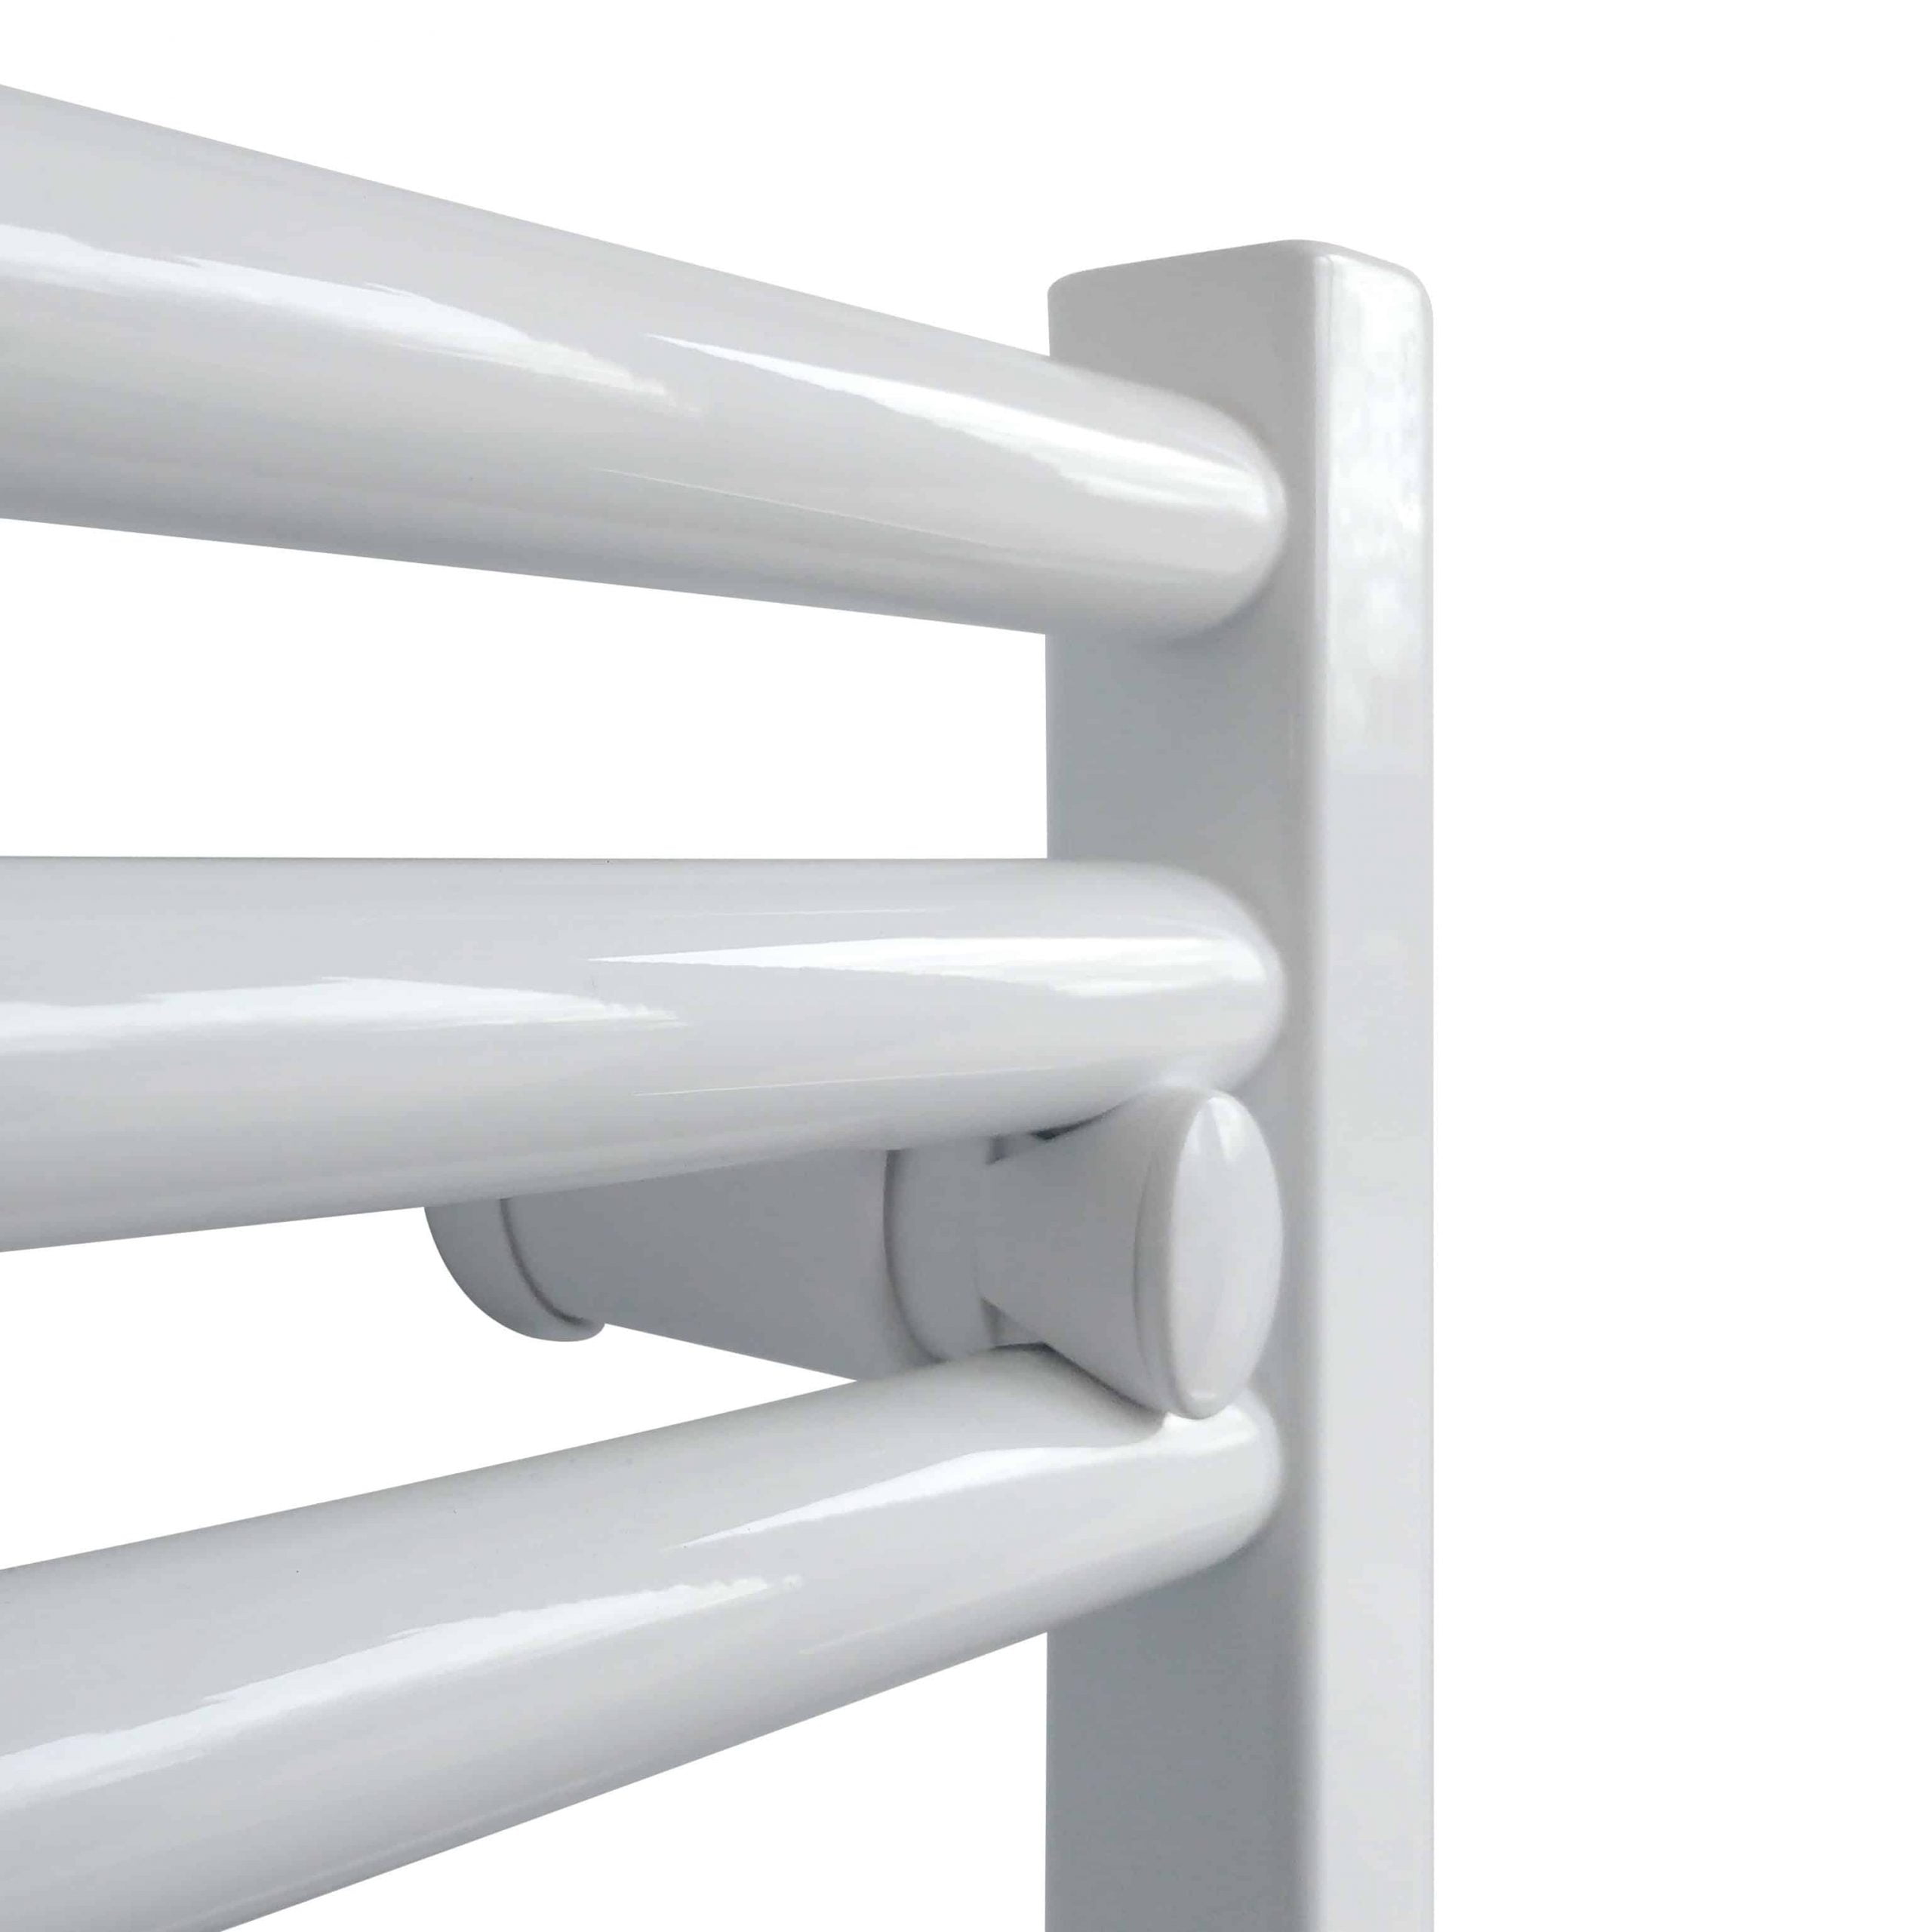 Bray Curved White | Dual Fuel Towel Rail with Thermostat, Timer + WiFi Control Best Quality & Price, Energy Saving / Economic To Run Buy Online From Adax SolAire UK Shop 19